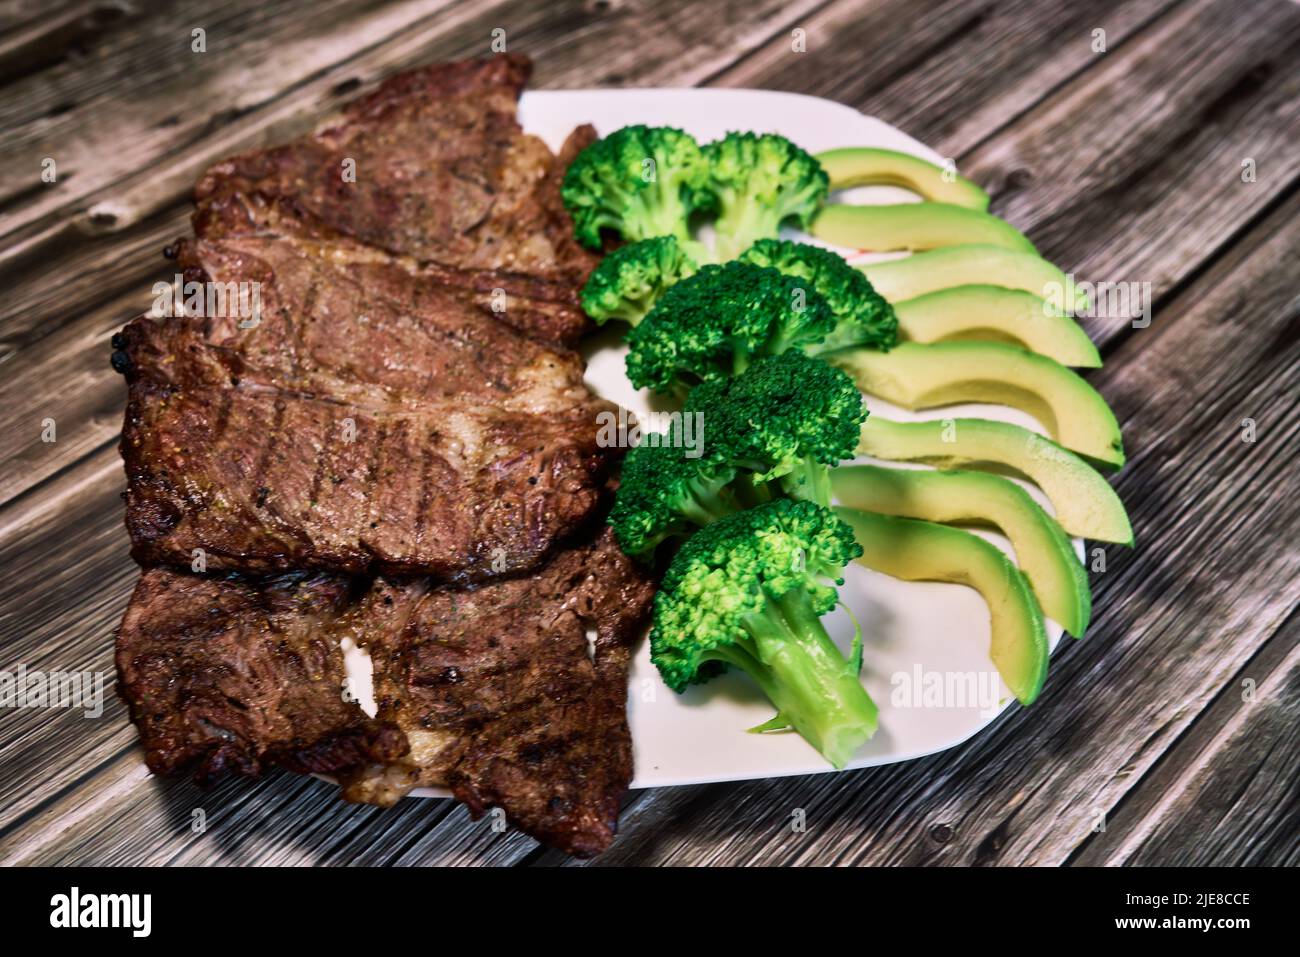 Keto diet based on beef steak, broccoli and avocado. High quality photo Stock Photo